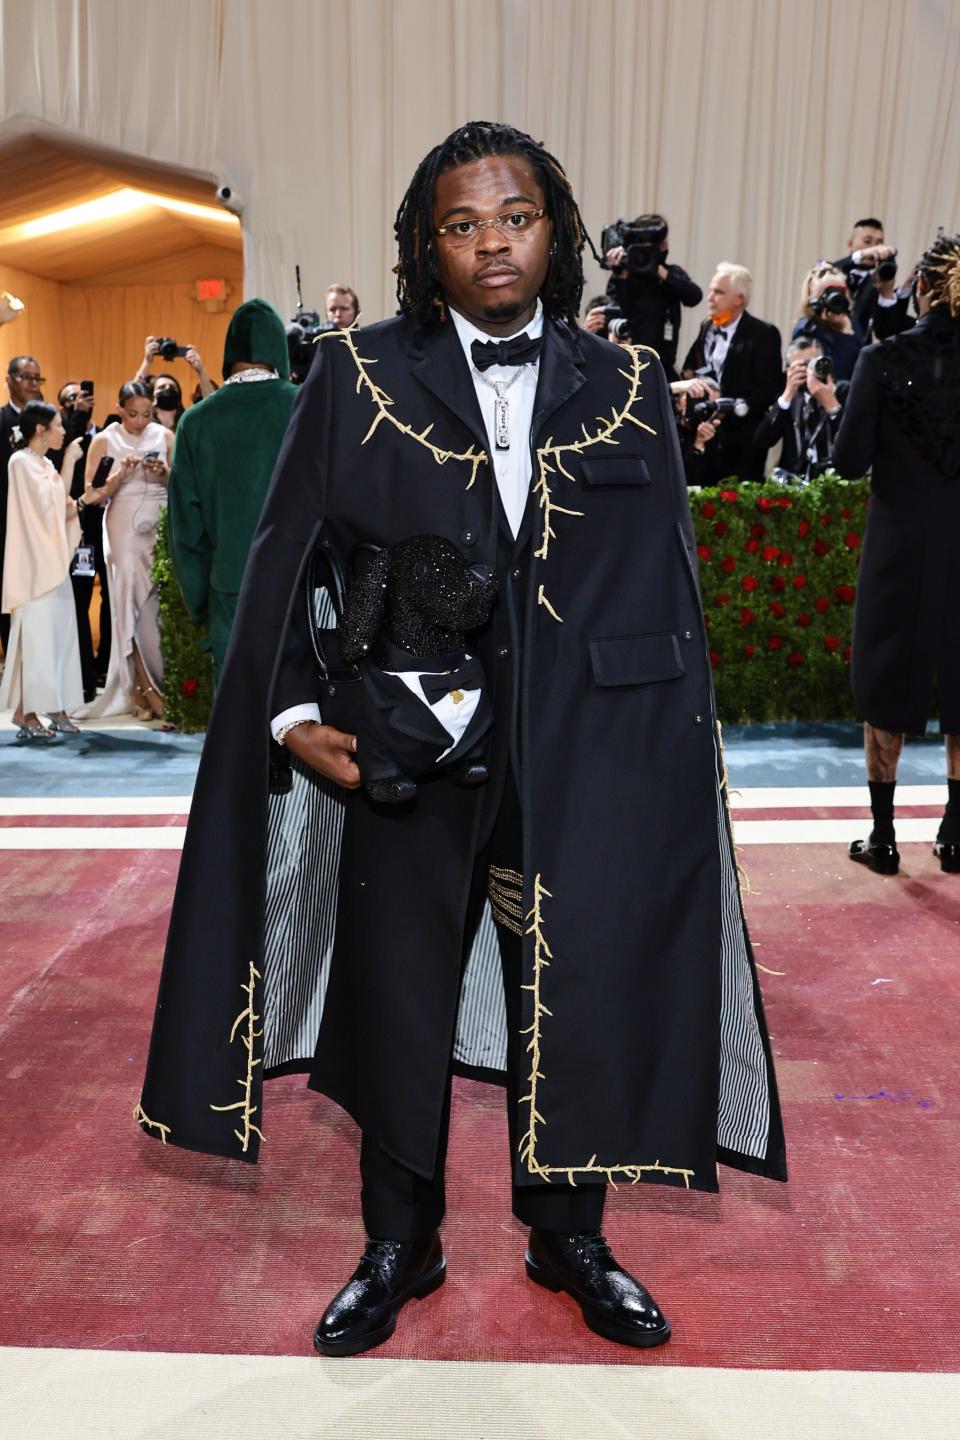 Gunna in a black suit and black cape decorated with strands of gold thorn branches. He's holding a crystal black dog purse in a tuxedo.